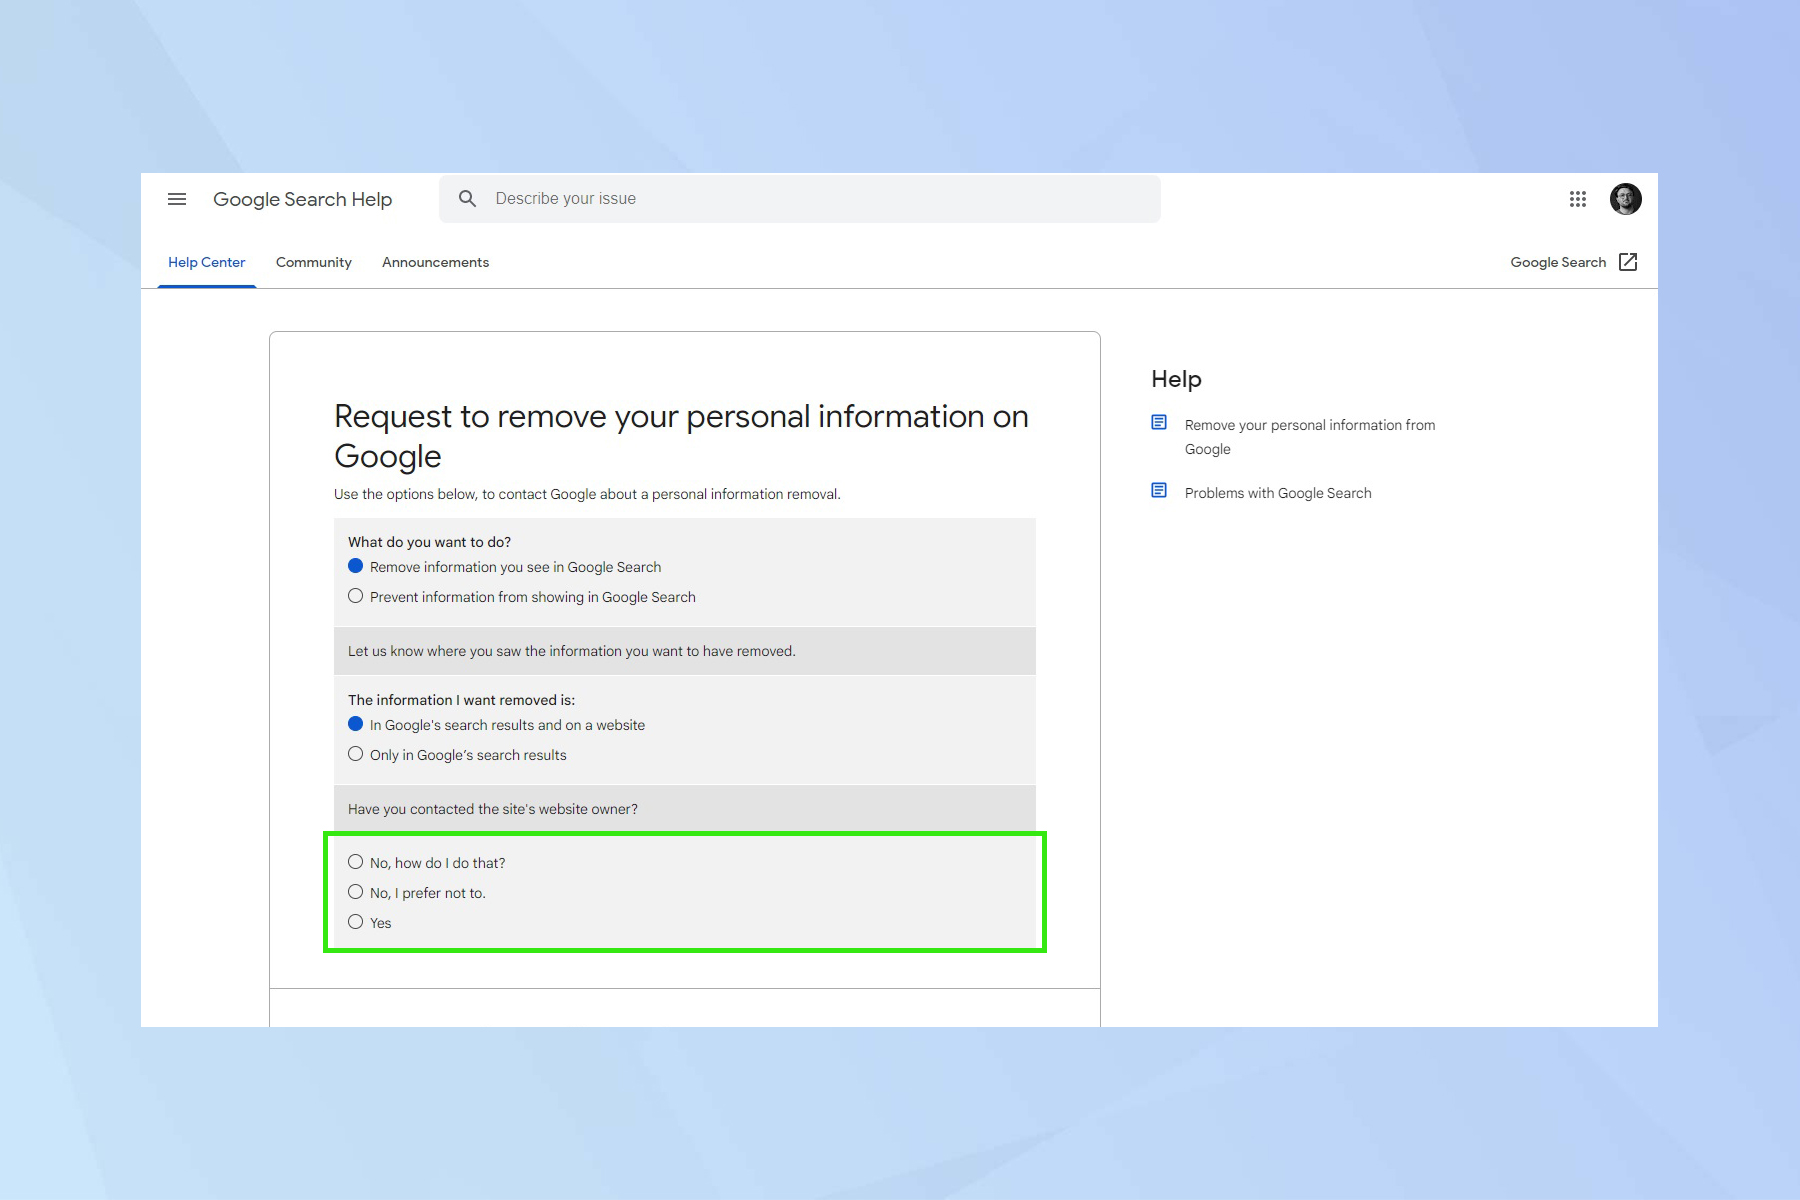 A screenshot showing the Google Search removal form - demonstrating how to remove contact details from Google Search